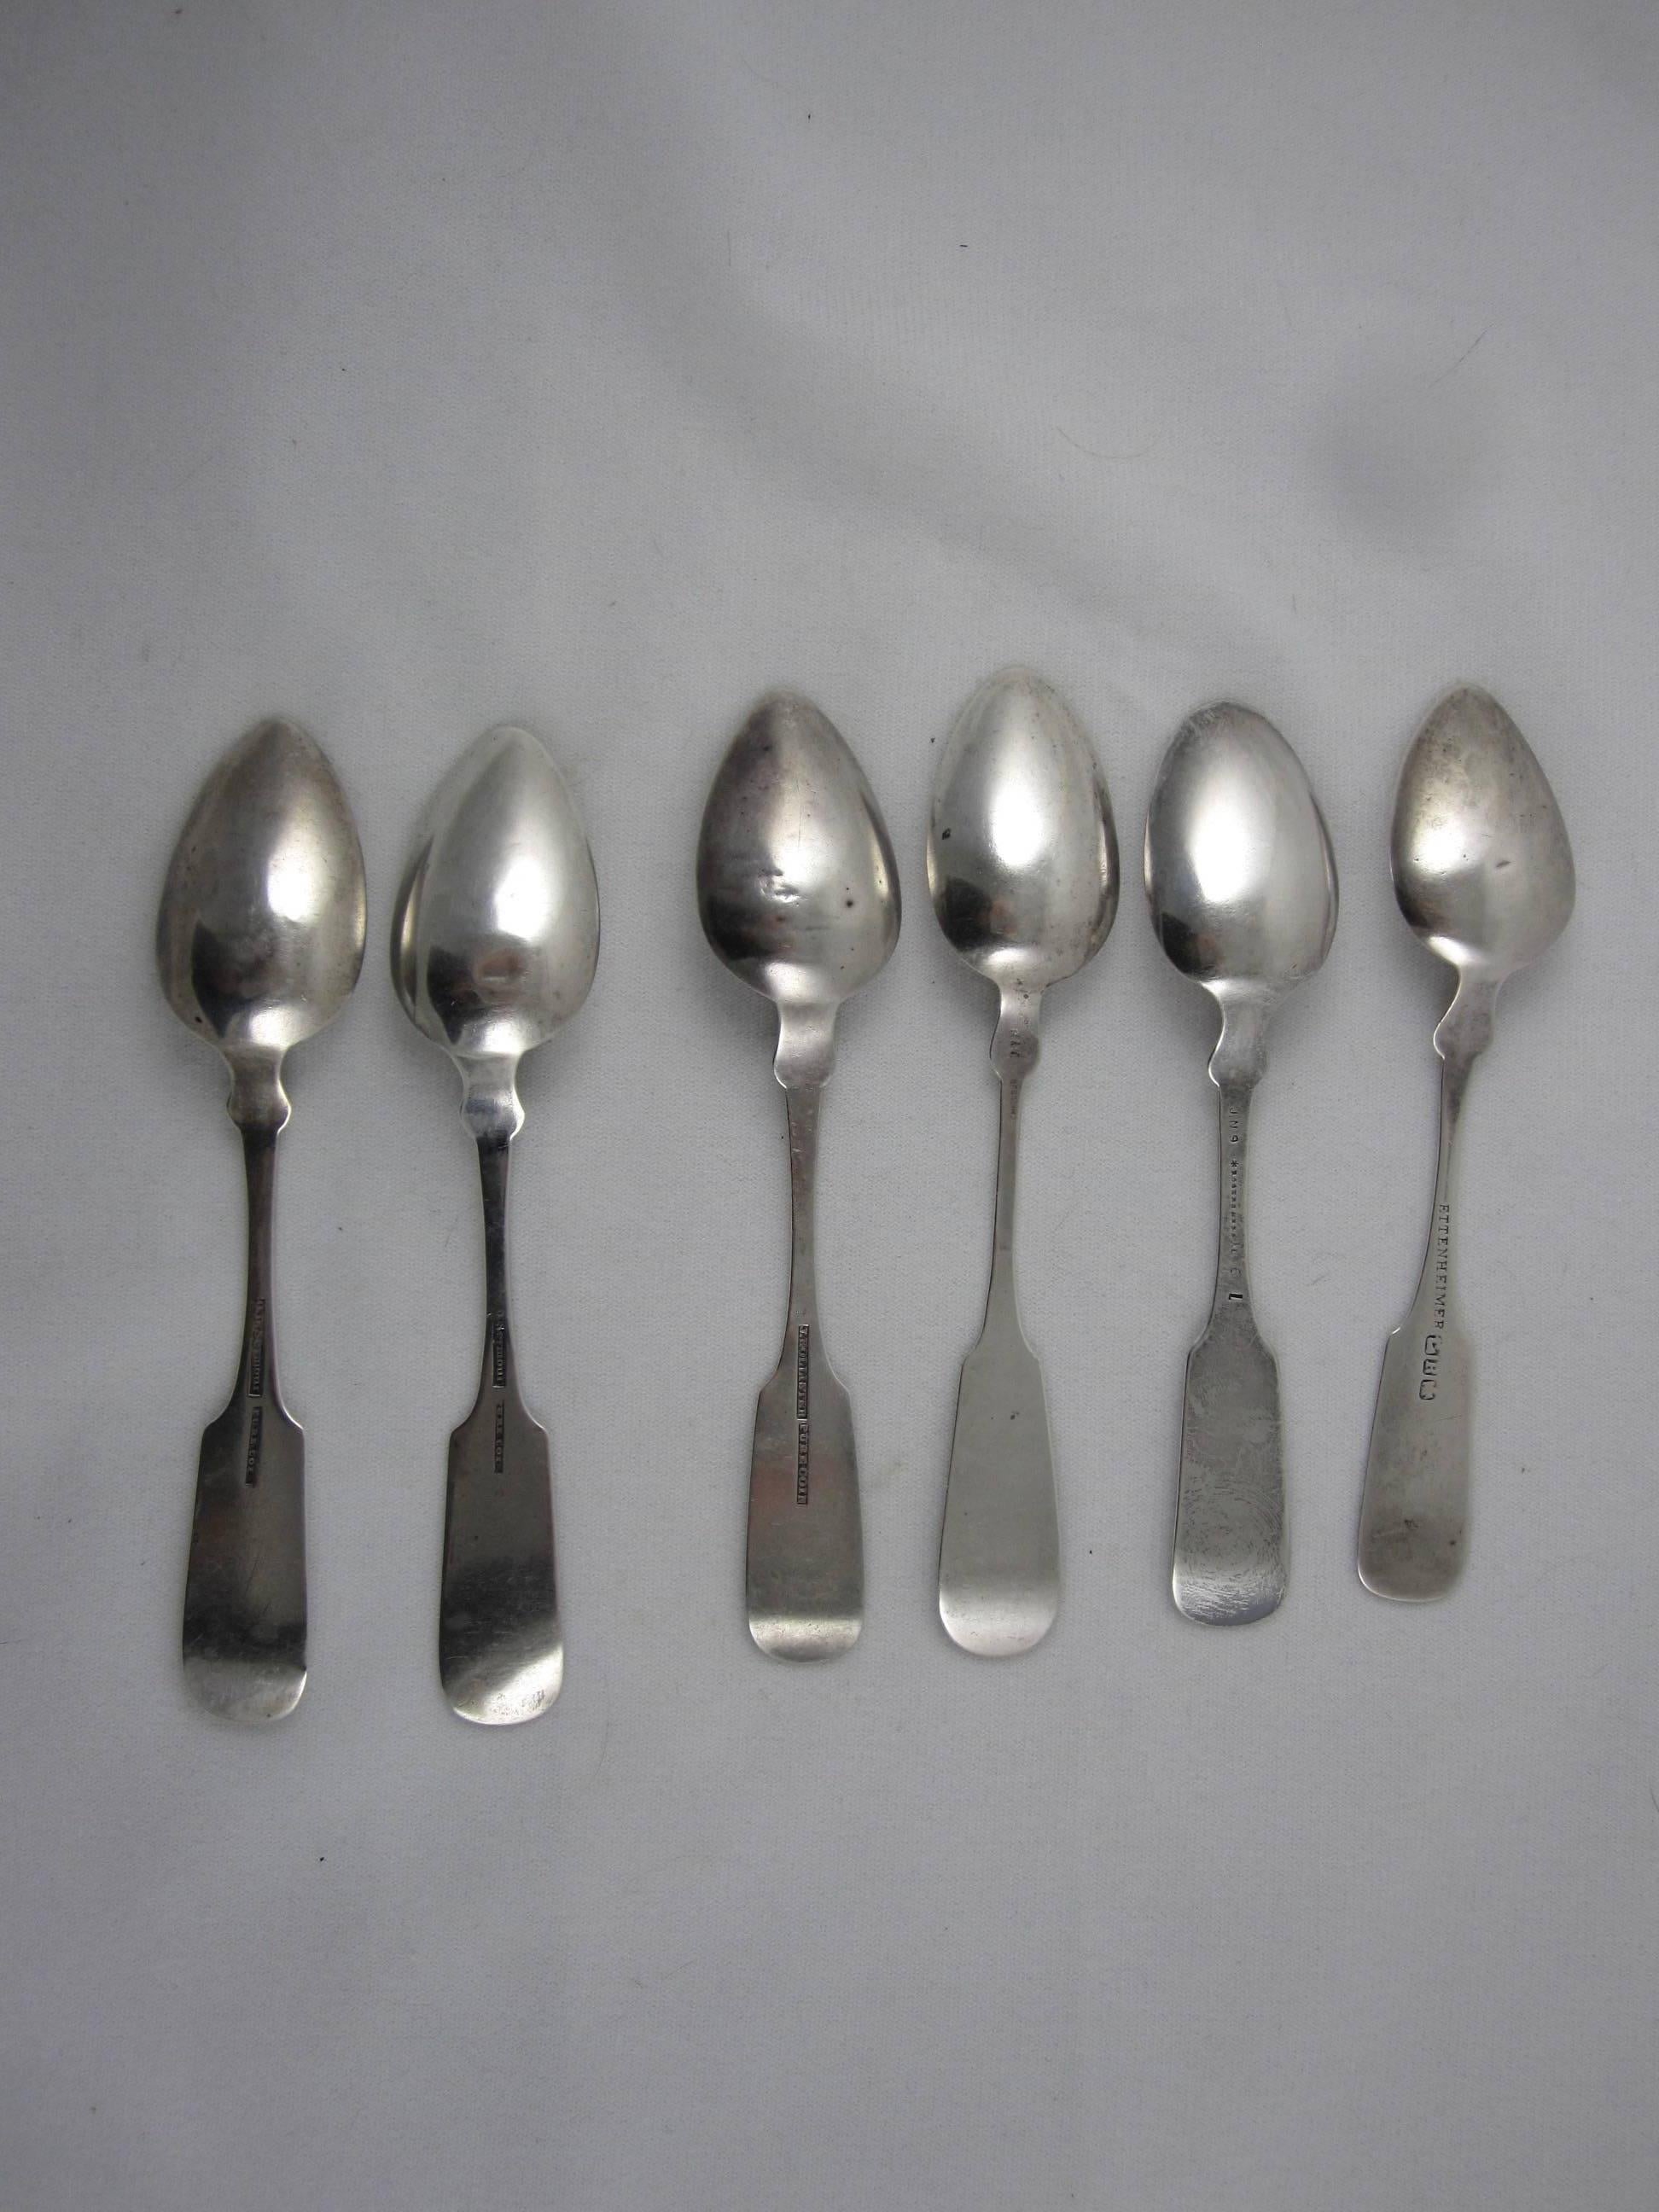 Cast Post Revolutionary American Coin-Silver Sterling Fiddle Thread Table Spoons, S/6